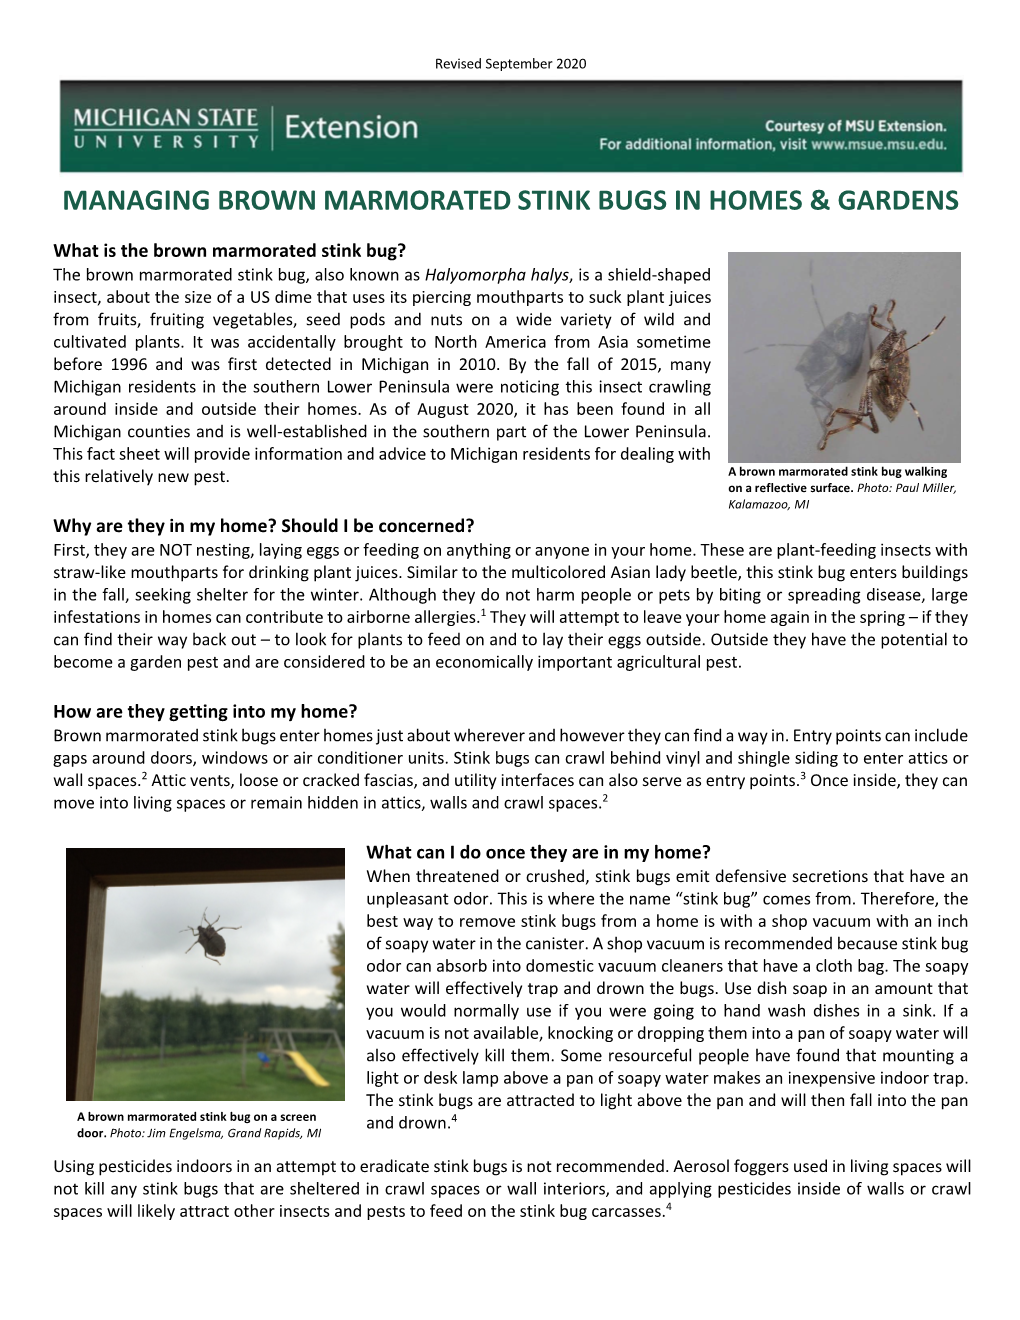 Managing Brown Marmorated Stink Bugs in Homes & Gardens